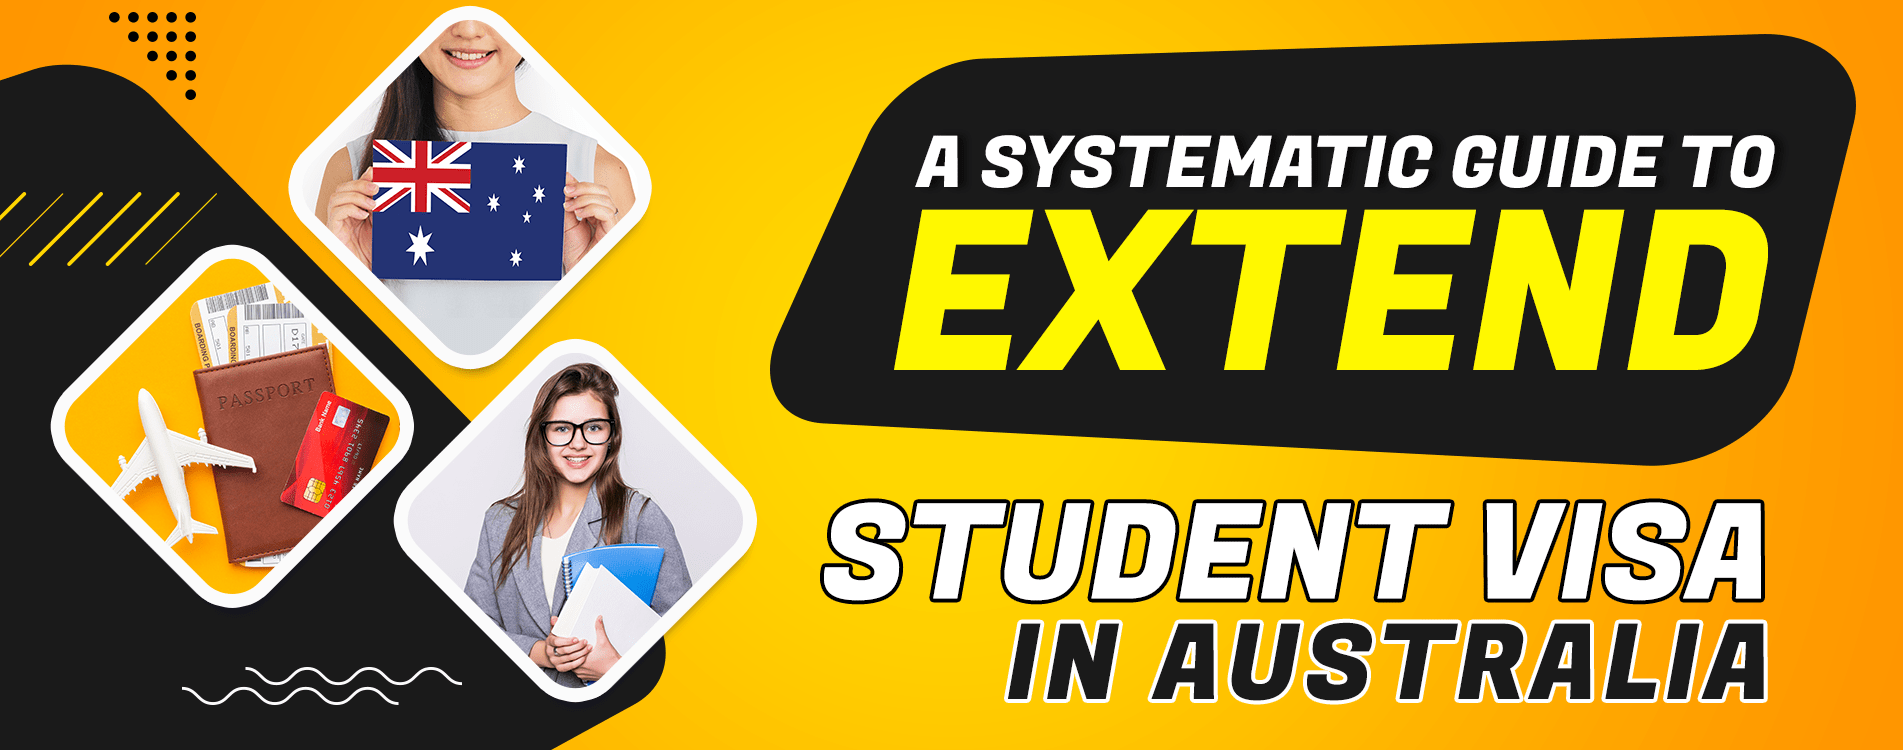 A Systematic Guide to Extend Student Visa in Australia